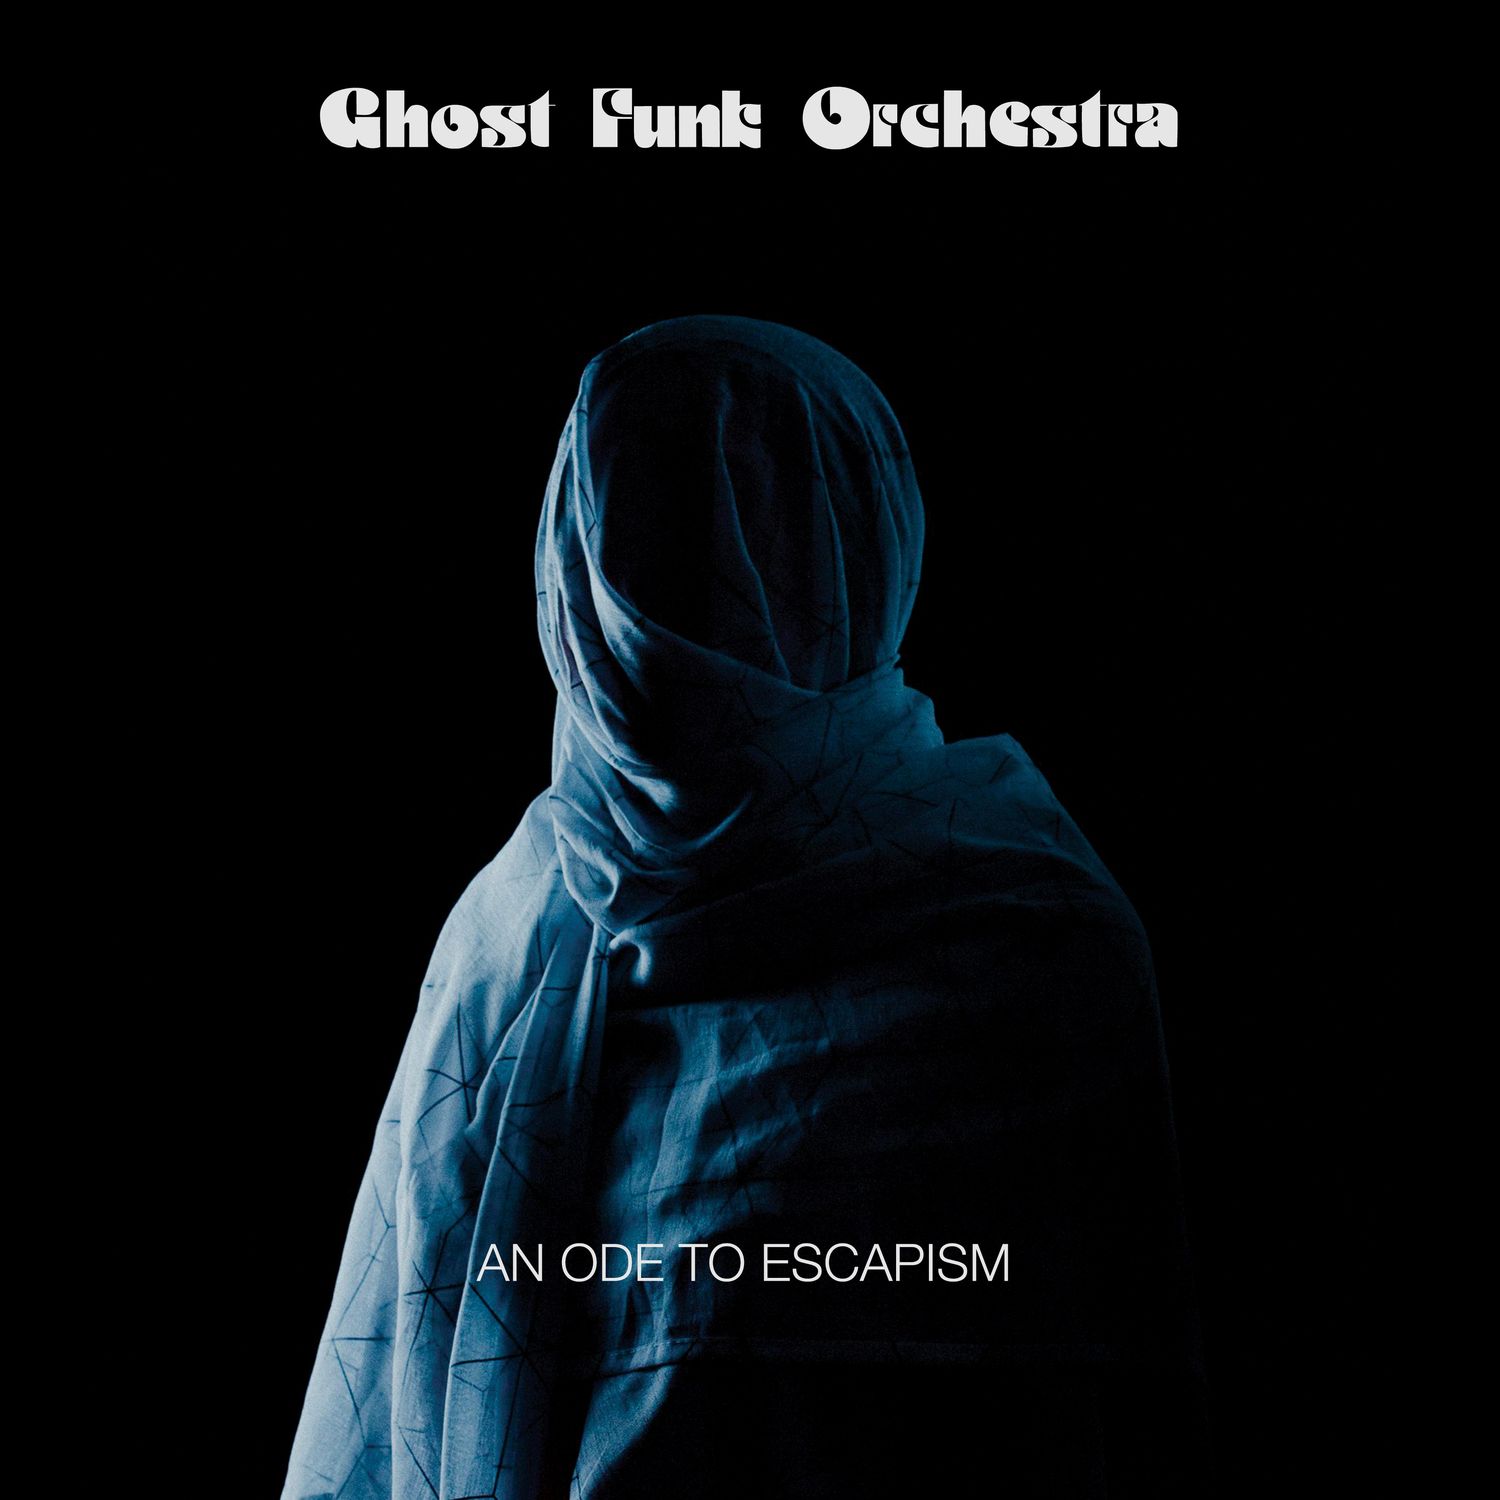 Ghost Funk Orchestra - An Ode To Escapism (2020) [FLAC 24bit/44,1kHz]